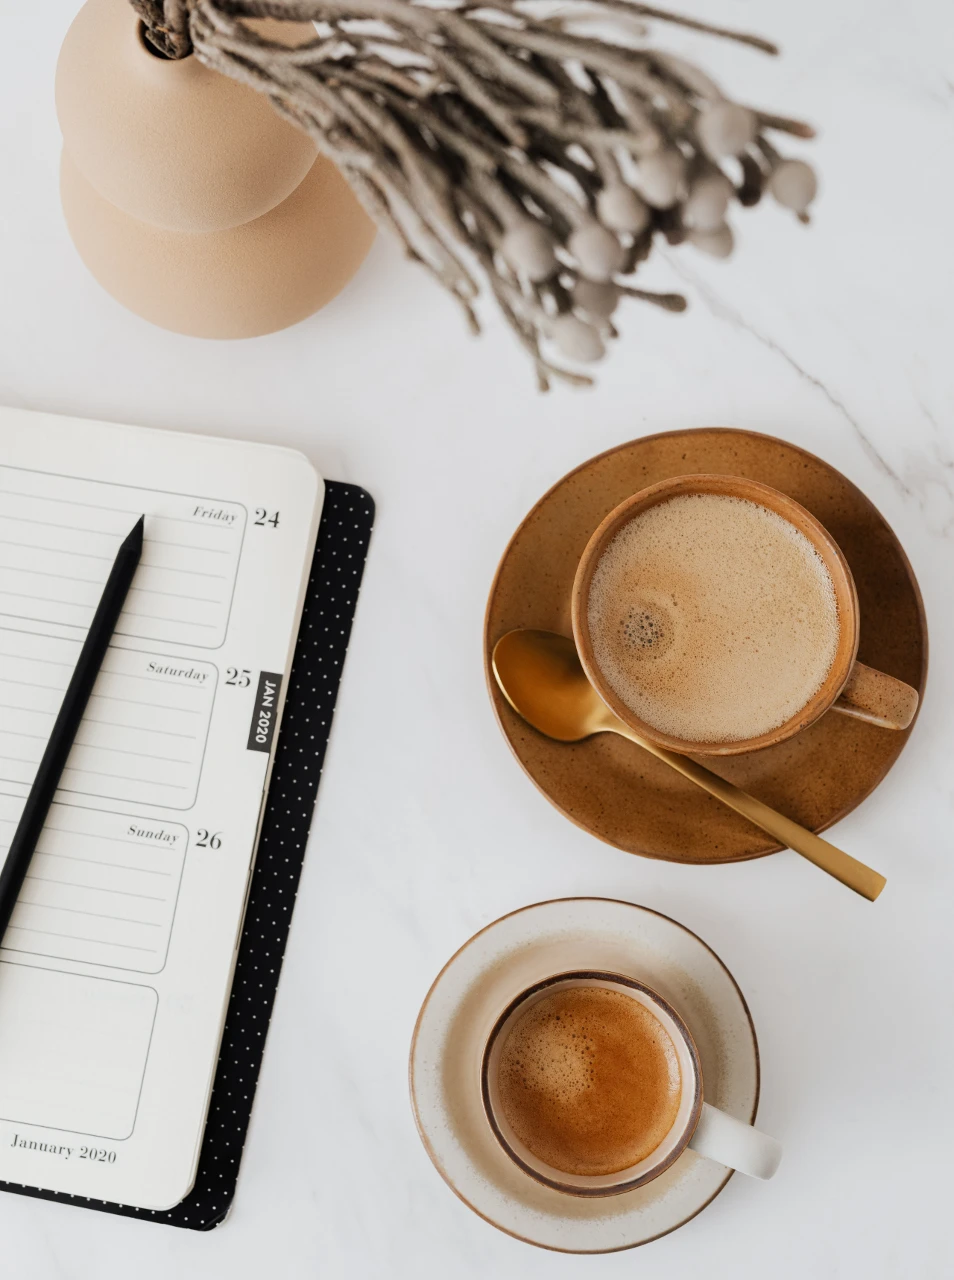 Two cups of coffee sit on a marble table, beside an open planner